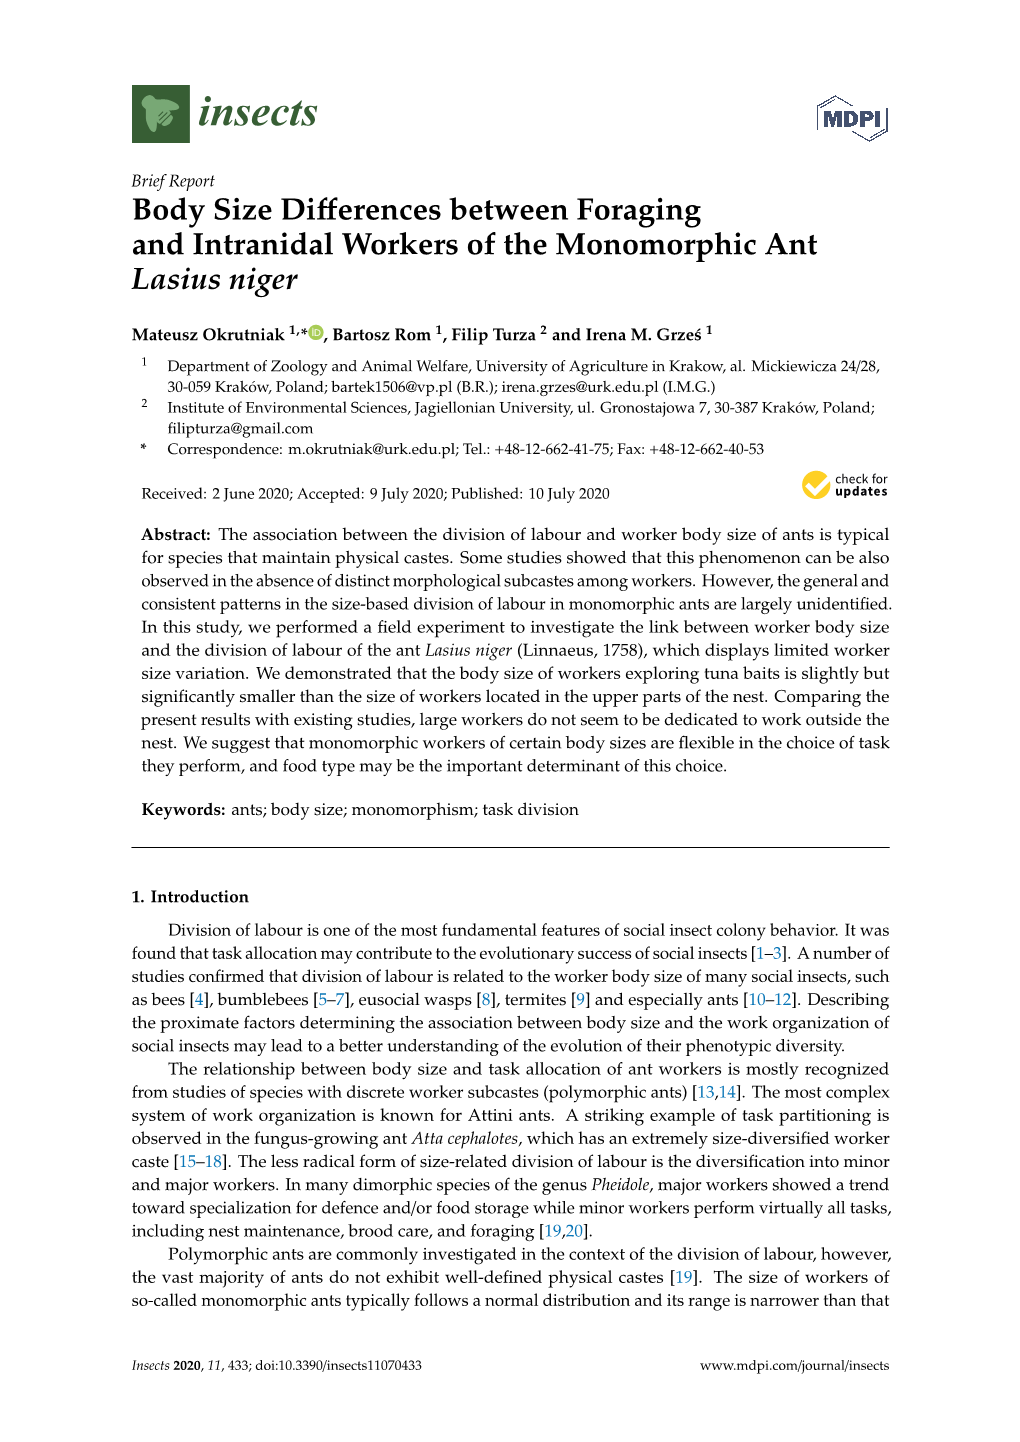 Body Size Differences Between Foraging and Intranidal Workers Of